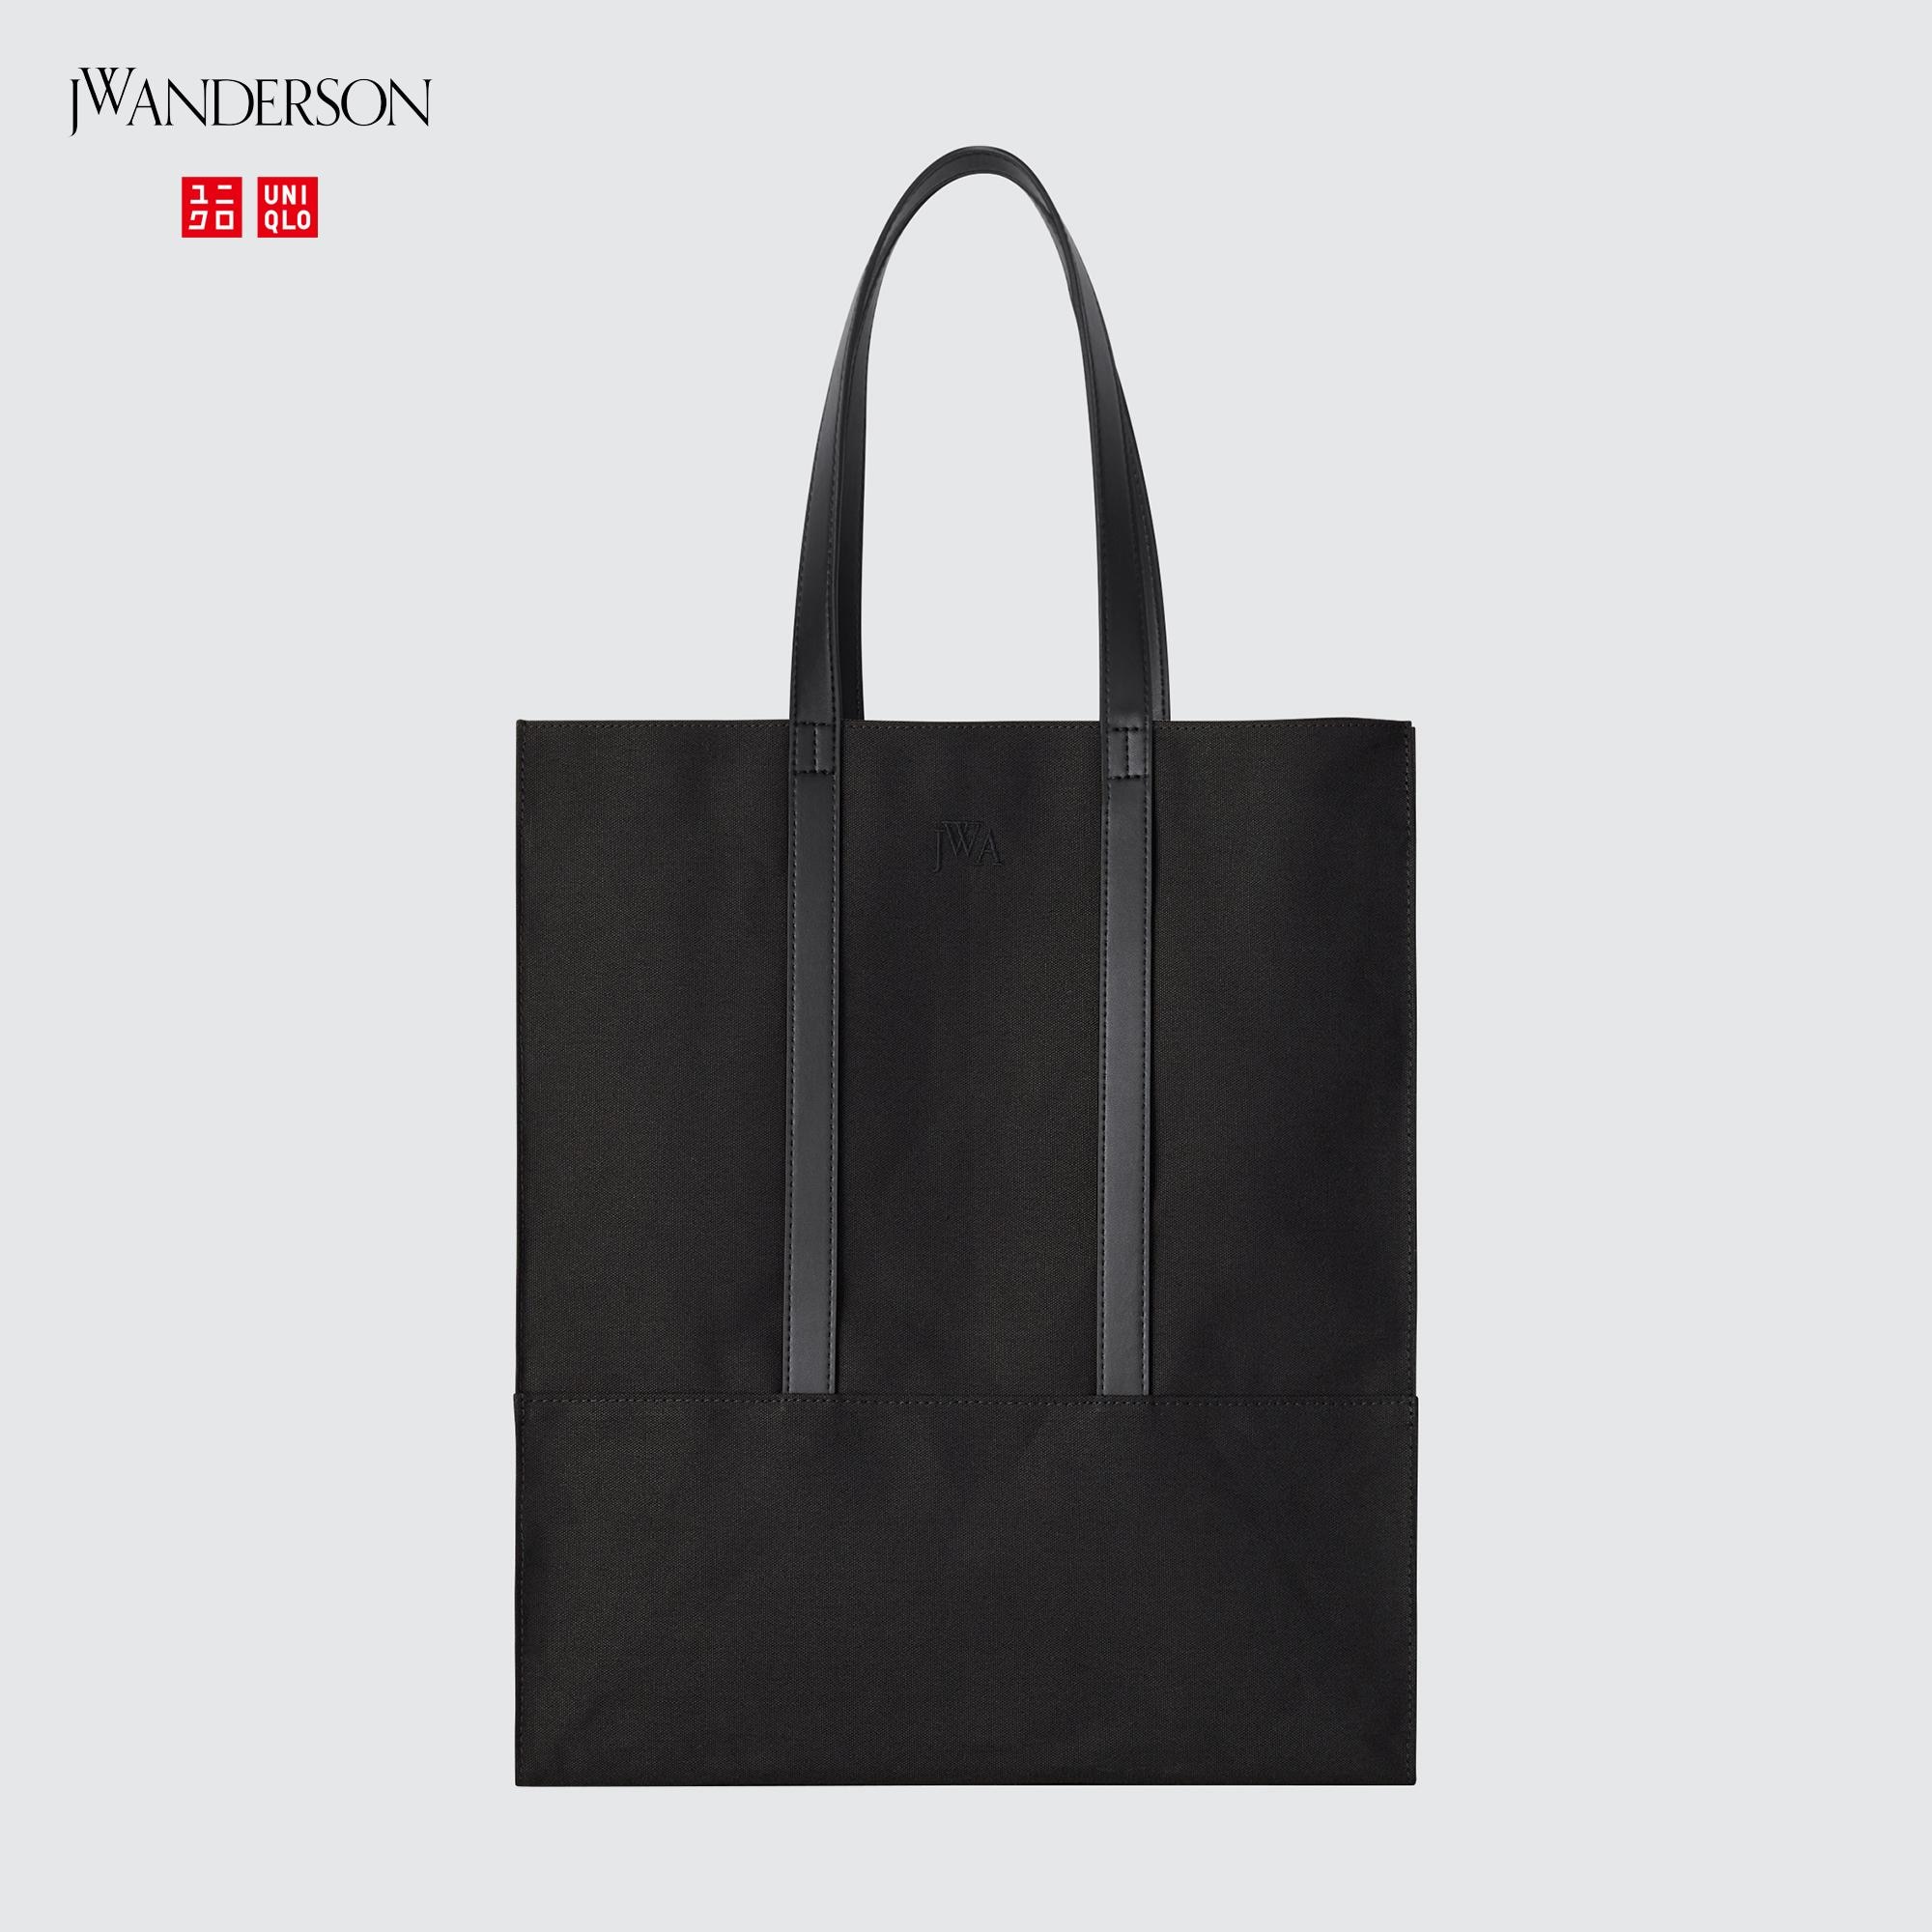 J W Anderson x UNIQLO TOTE BAGBACK PACK Very soft and smooth  materialBrand New  eBay